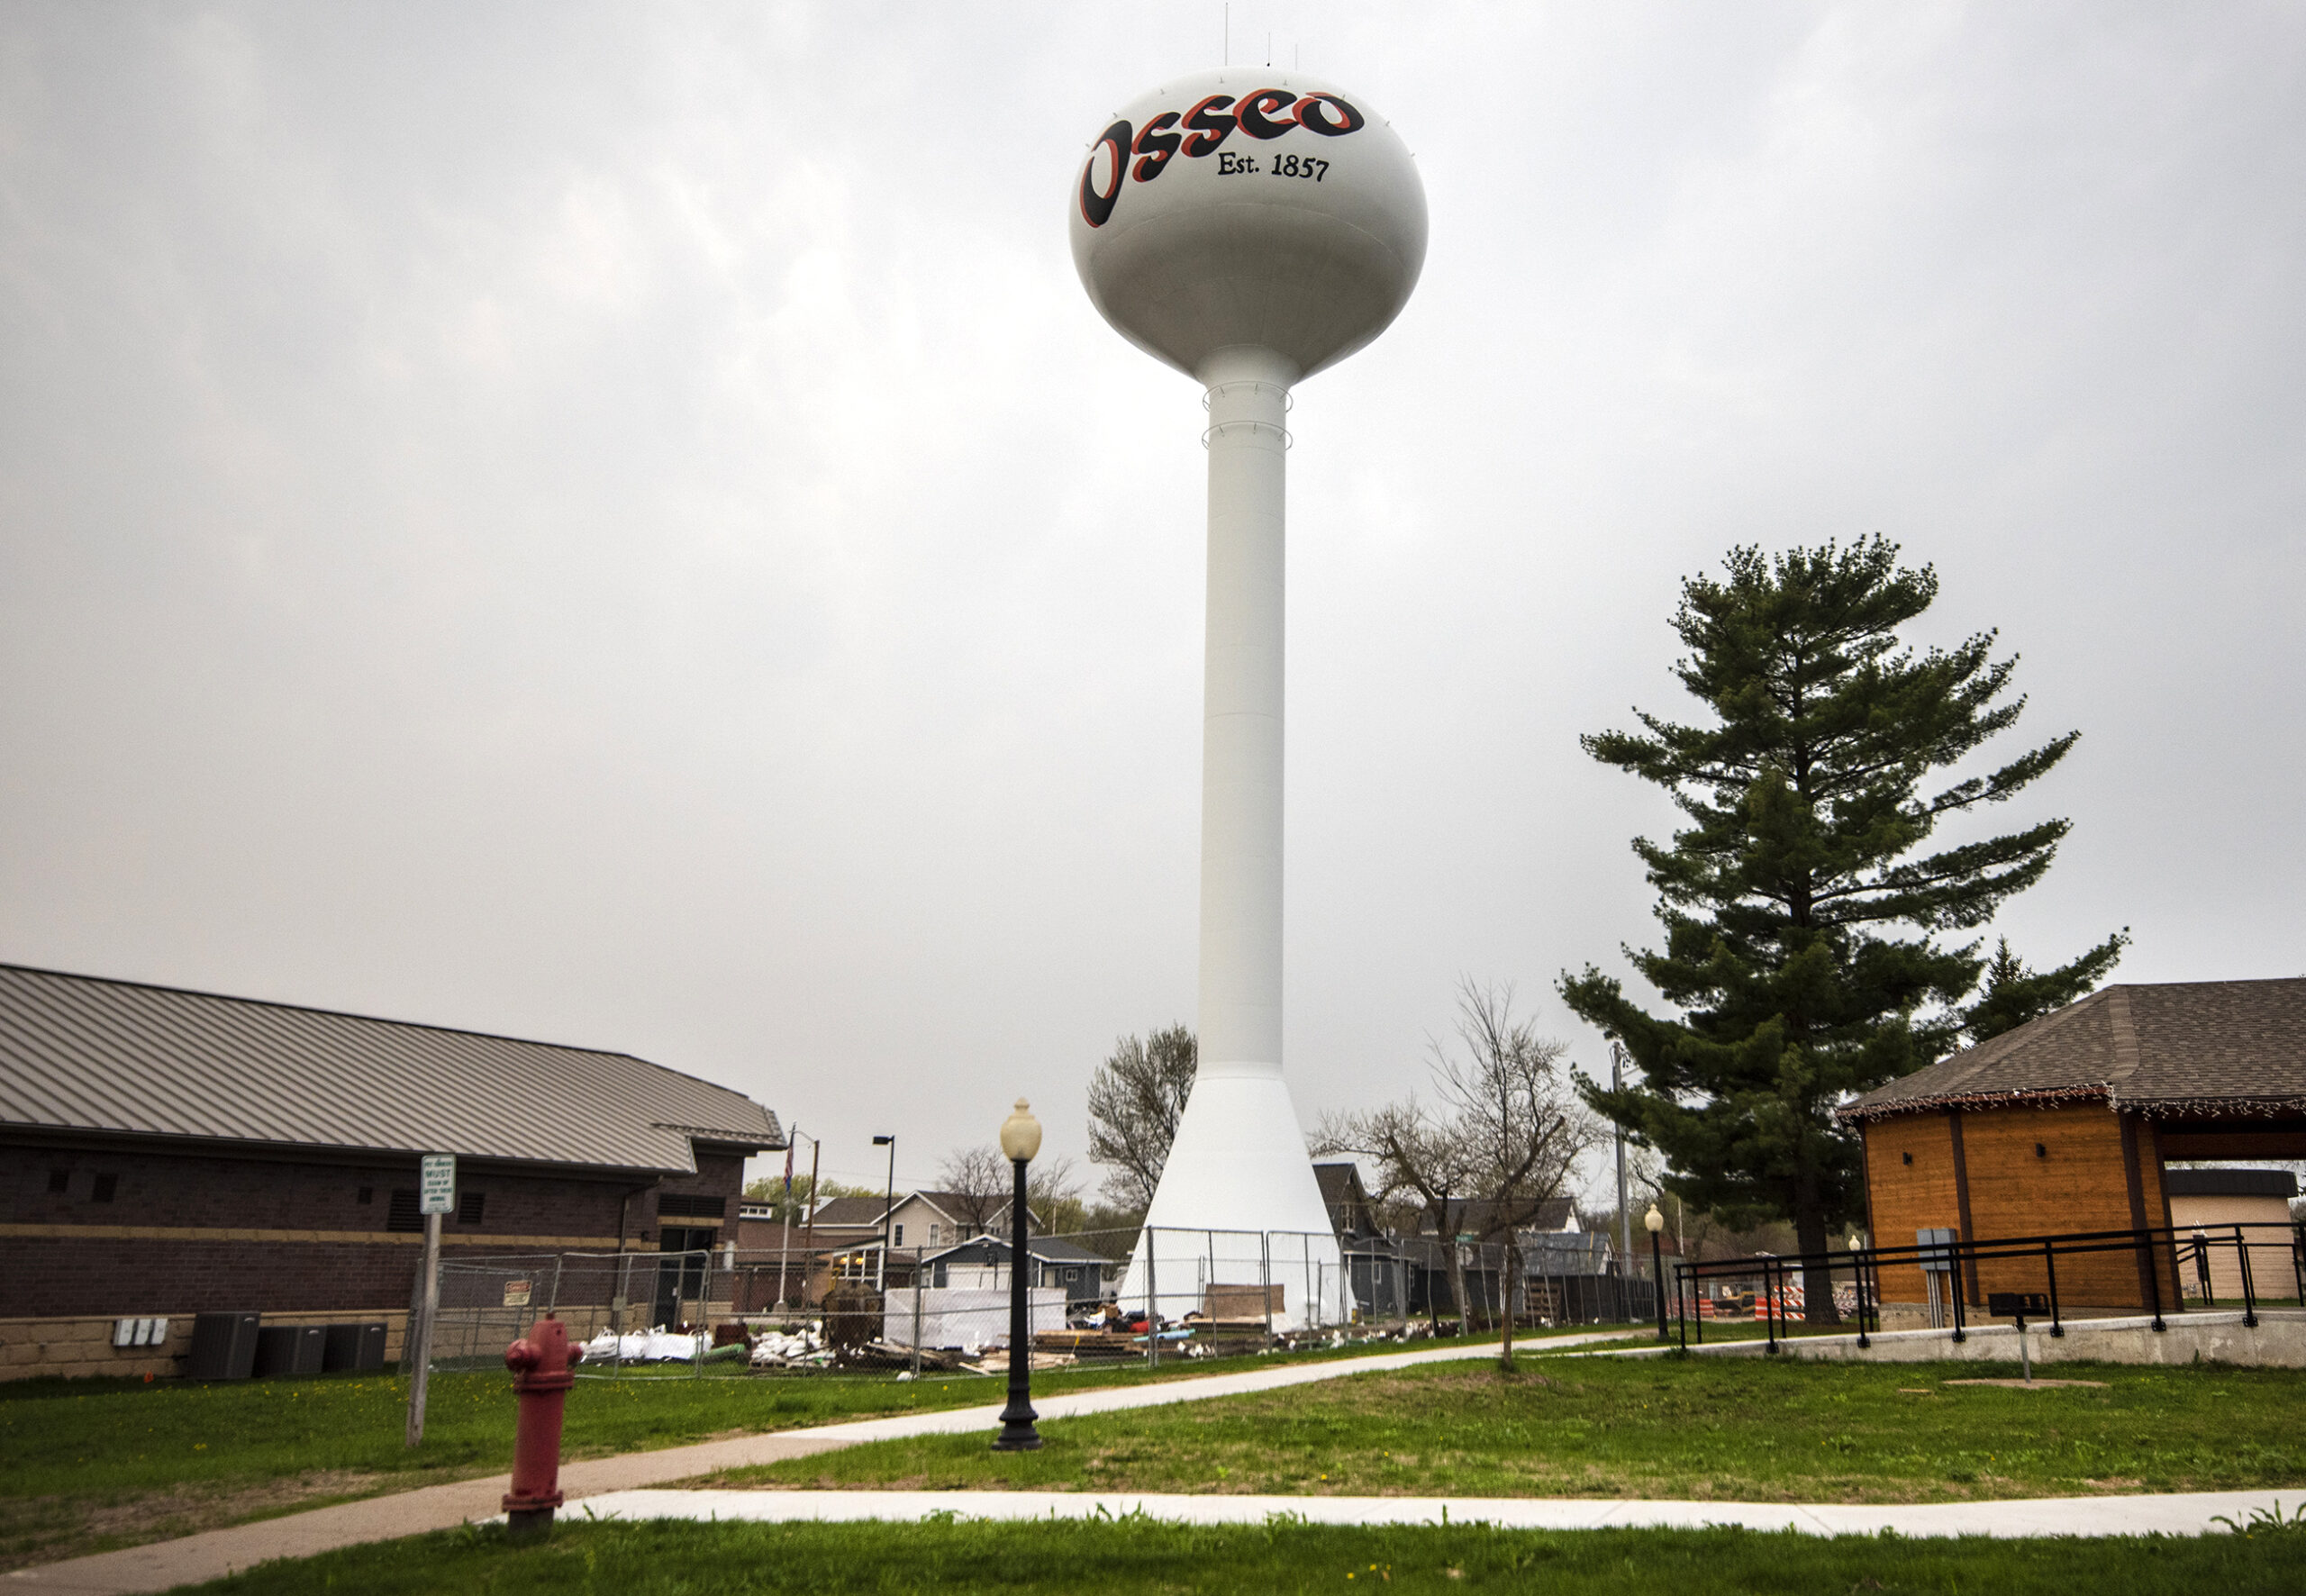 A white water tower has "Osseo" written on it.